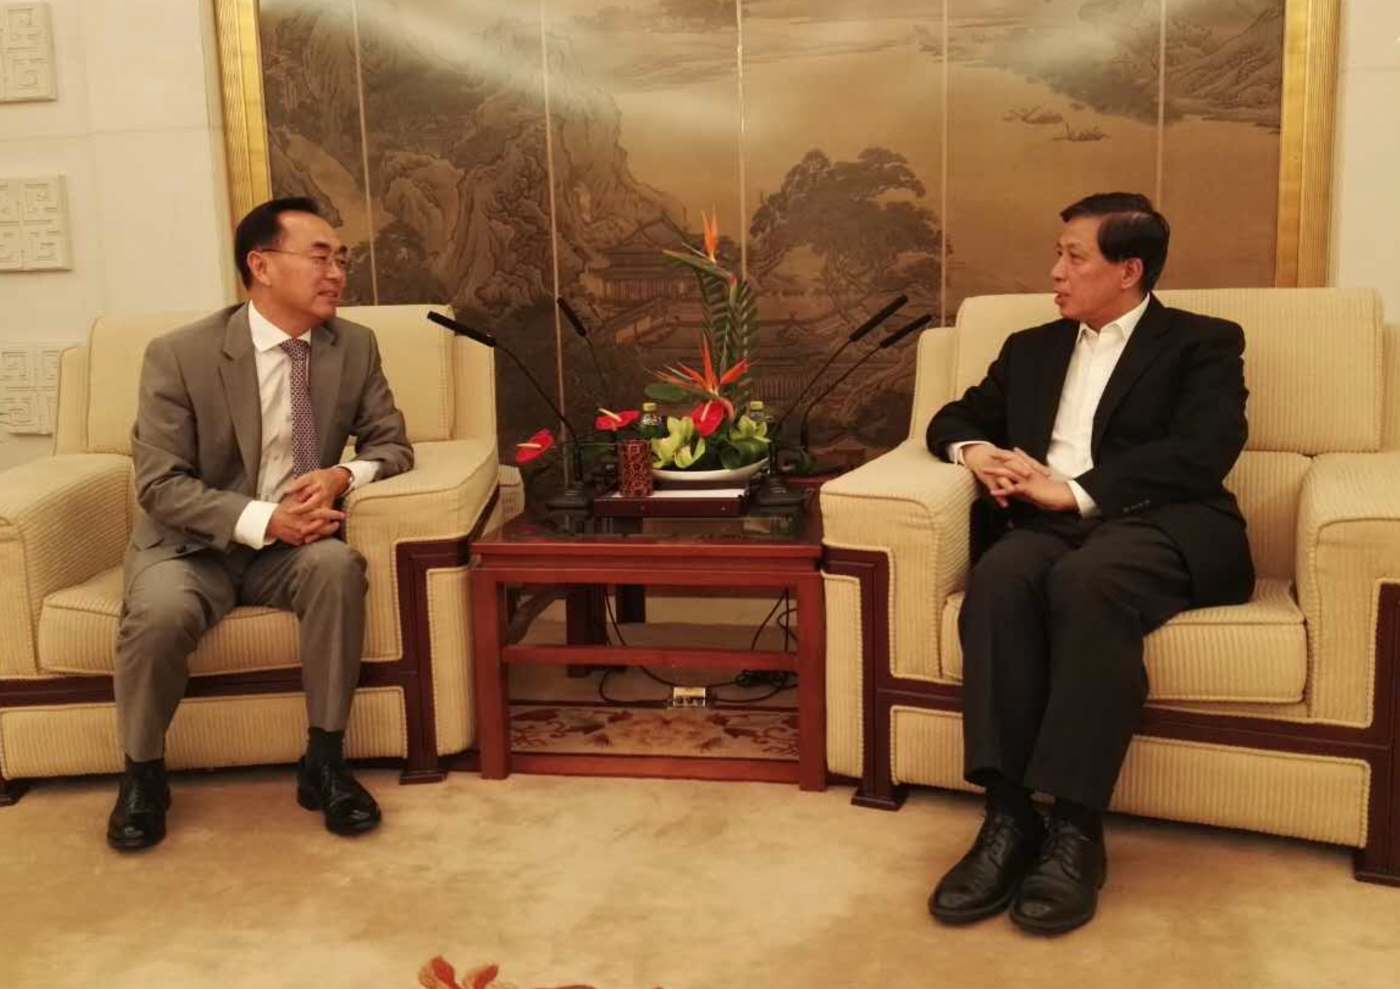 Pingfan Hong meeting with H.E. Yesui Zhang, First Deputy Foreign Minister of China